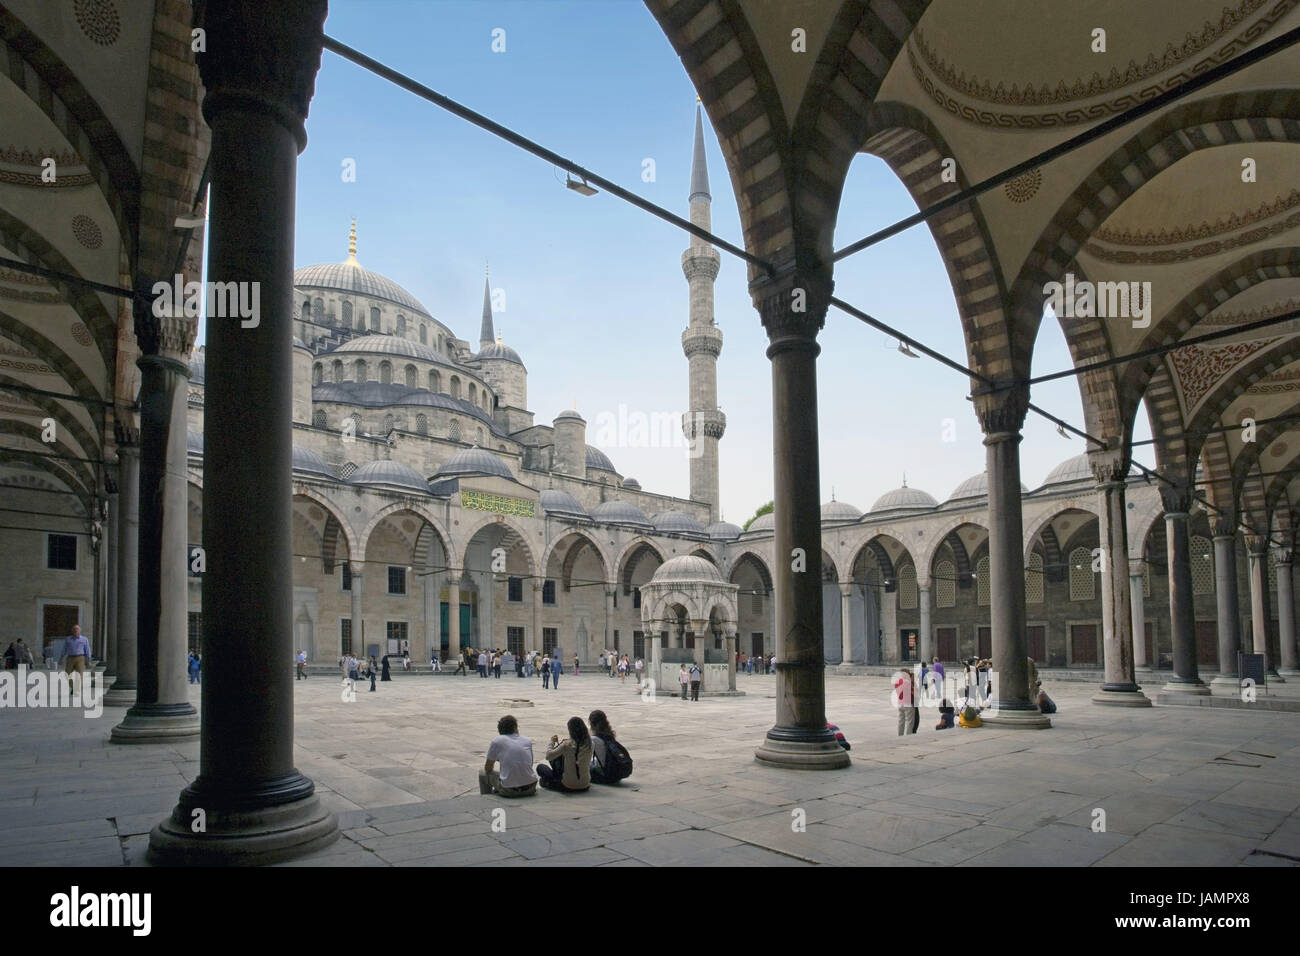 Turkey,Istanbul,sultan Ahmet Camii,inner courtyard,well,'blue mosque',tourists,town,city,metropolis,port,culture,faith,religion,Islam,structure,historically,architecture,church,Bethaus,sacred construction,Sultan-Ahmet-Camii,sultan's Ahmed's mosque,mosque,inner courtyard,atrium,mosque atrium,Avsu,arcades,cleaning wells,Sadirvan,domed building,towers,minarets,landmarks,place of interest,outside,people, Stock Photo